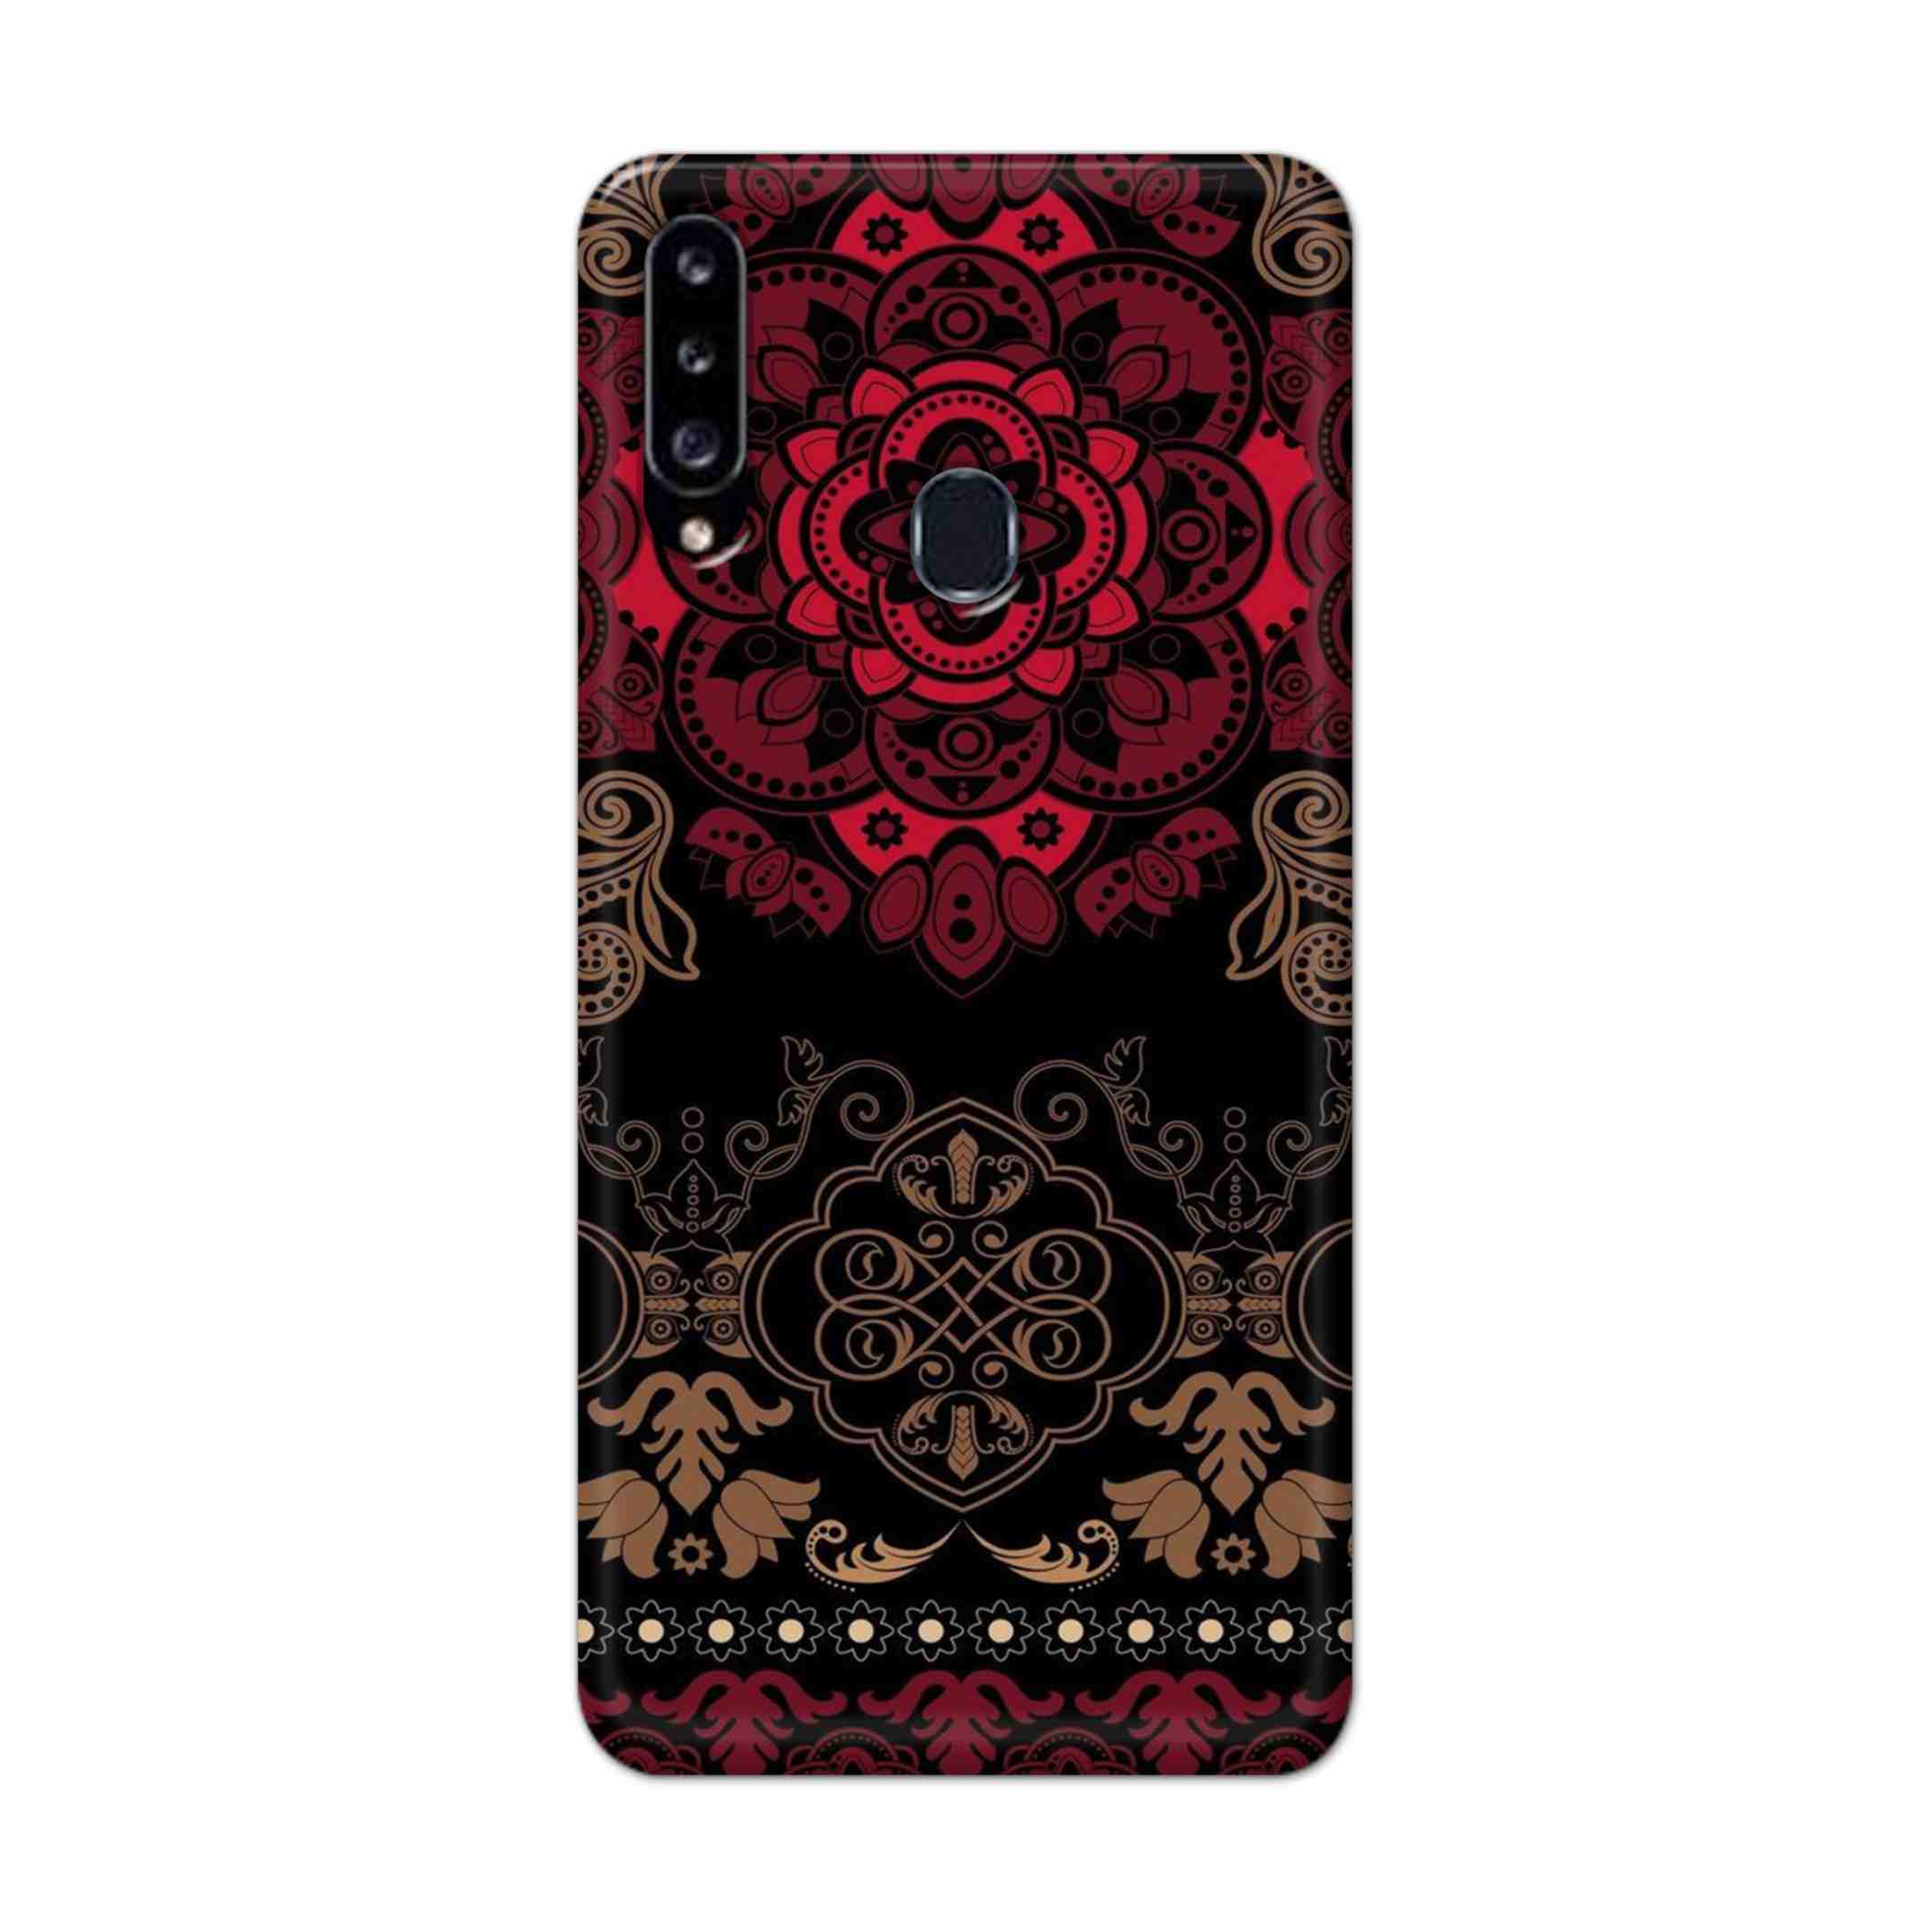 Buy Christian Mandalas Hard Back Mobile Phone Case Cover For Samsung Galaxy A21 Online